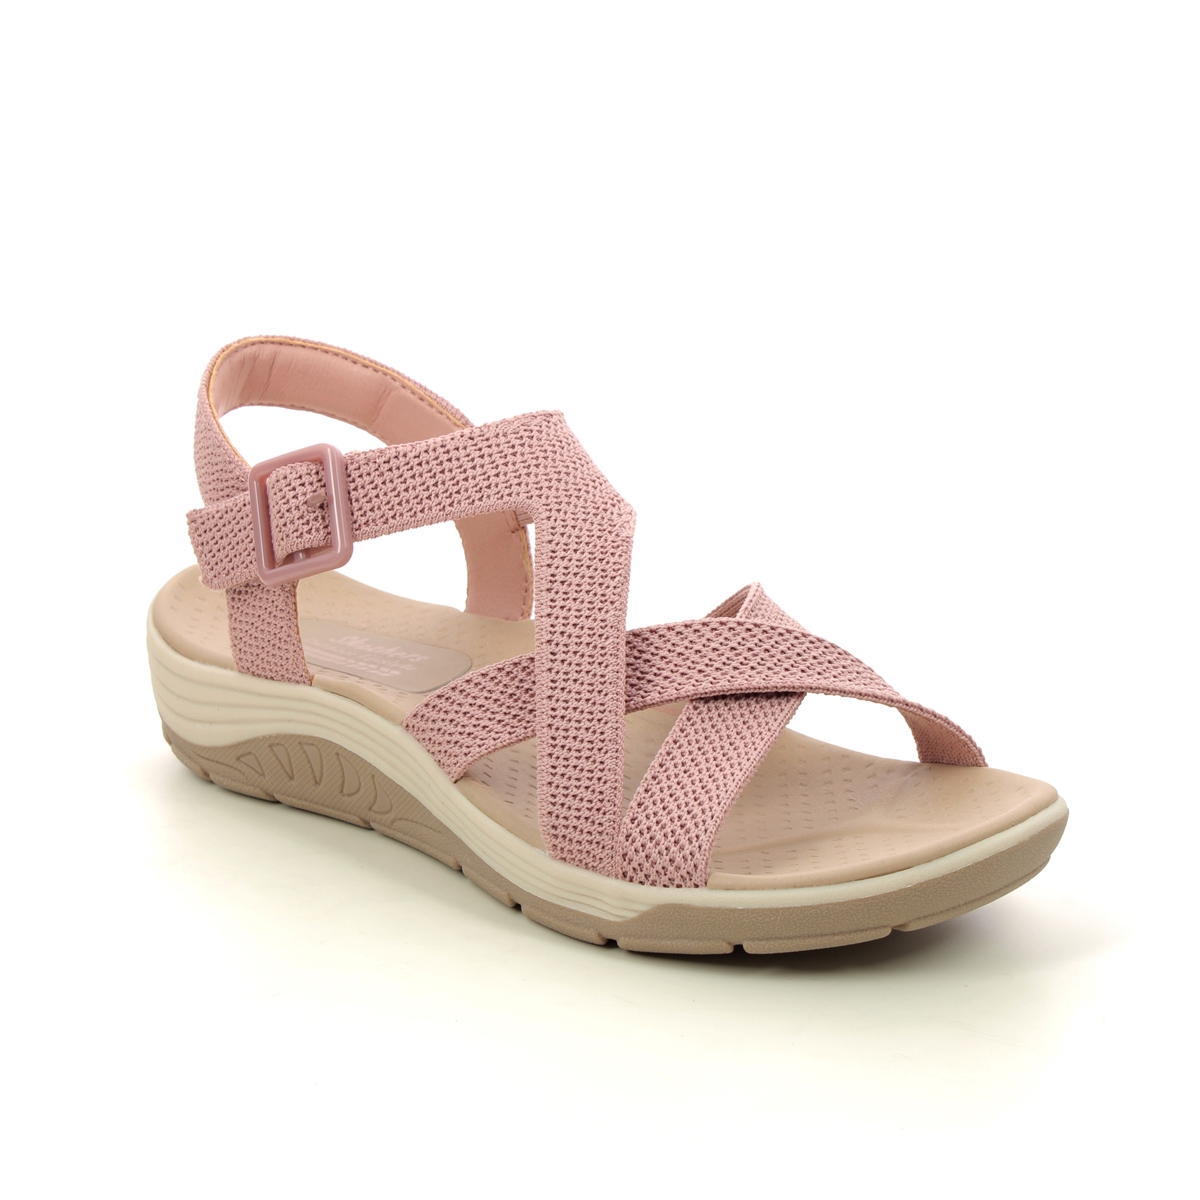 Skechers Reggae Cup BLSH Blush Pink Womens Comfortable Sandals 163198 in a Plain Textile in Size 7